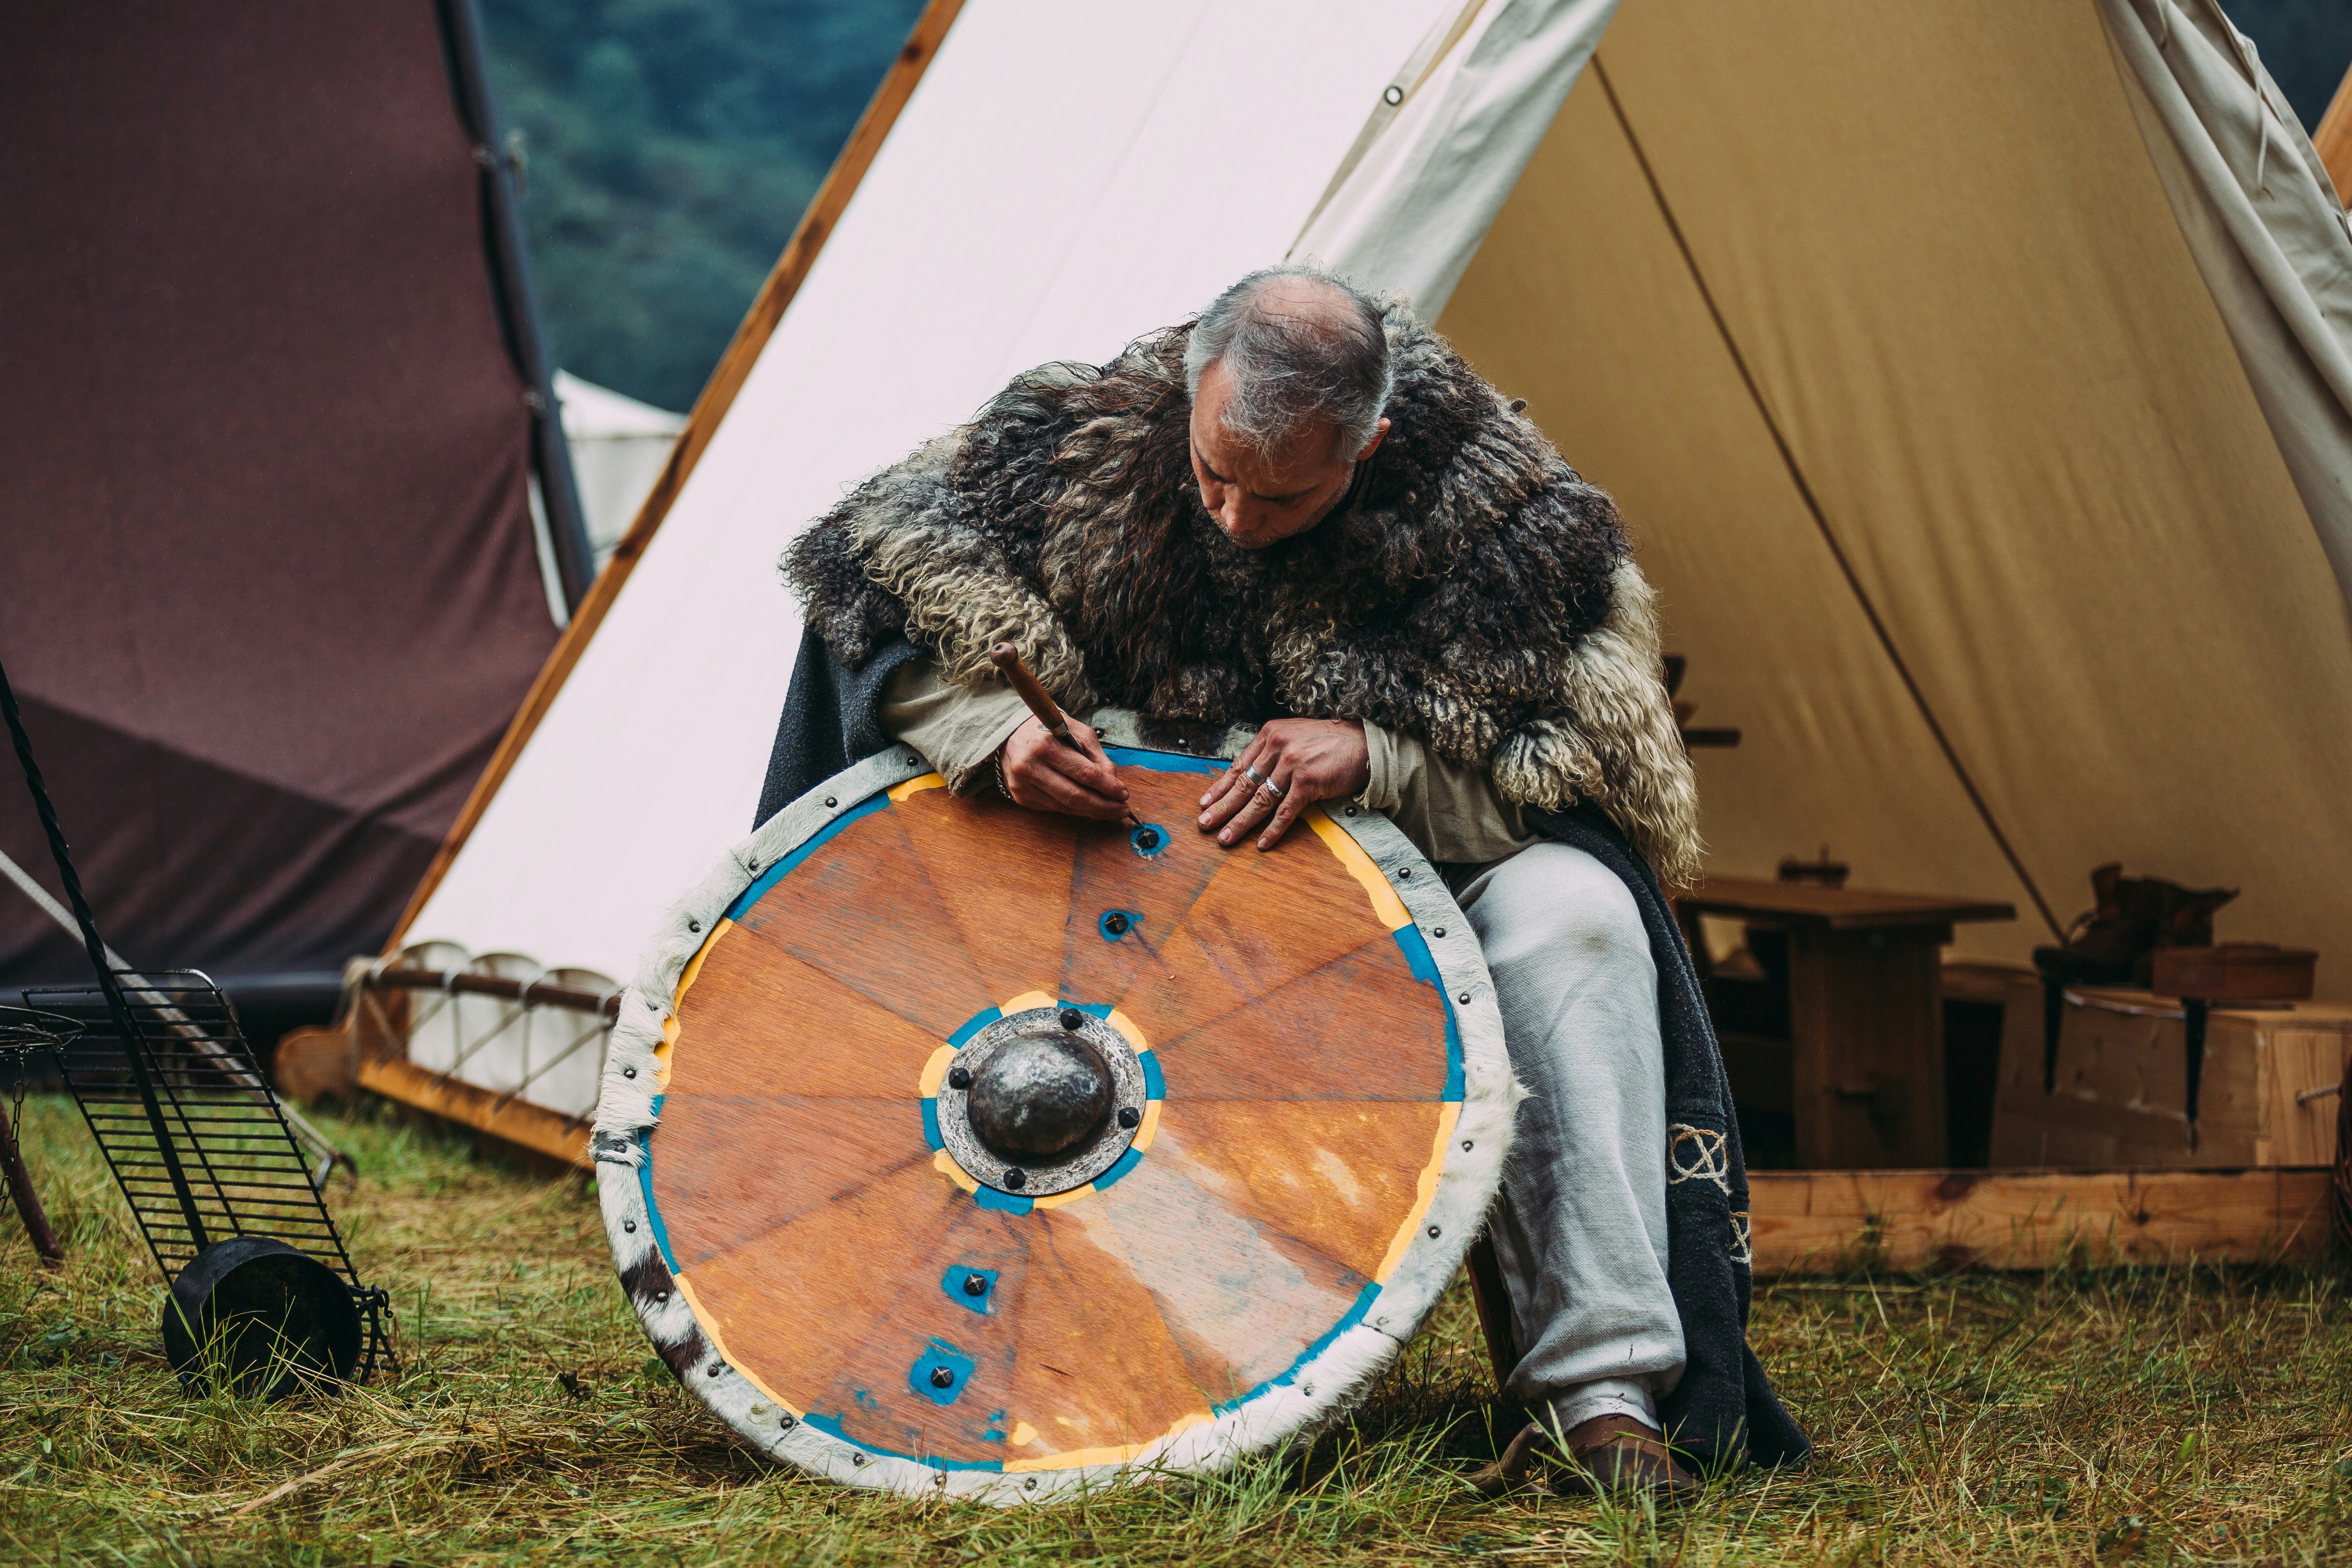 A man dressed in fur sits and leans over a traditional Viking shield